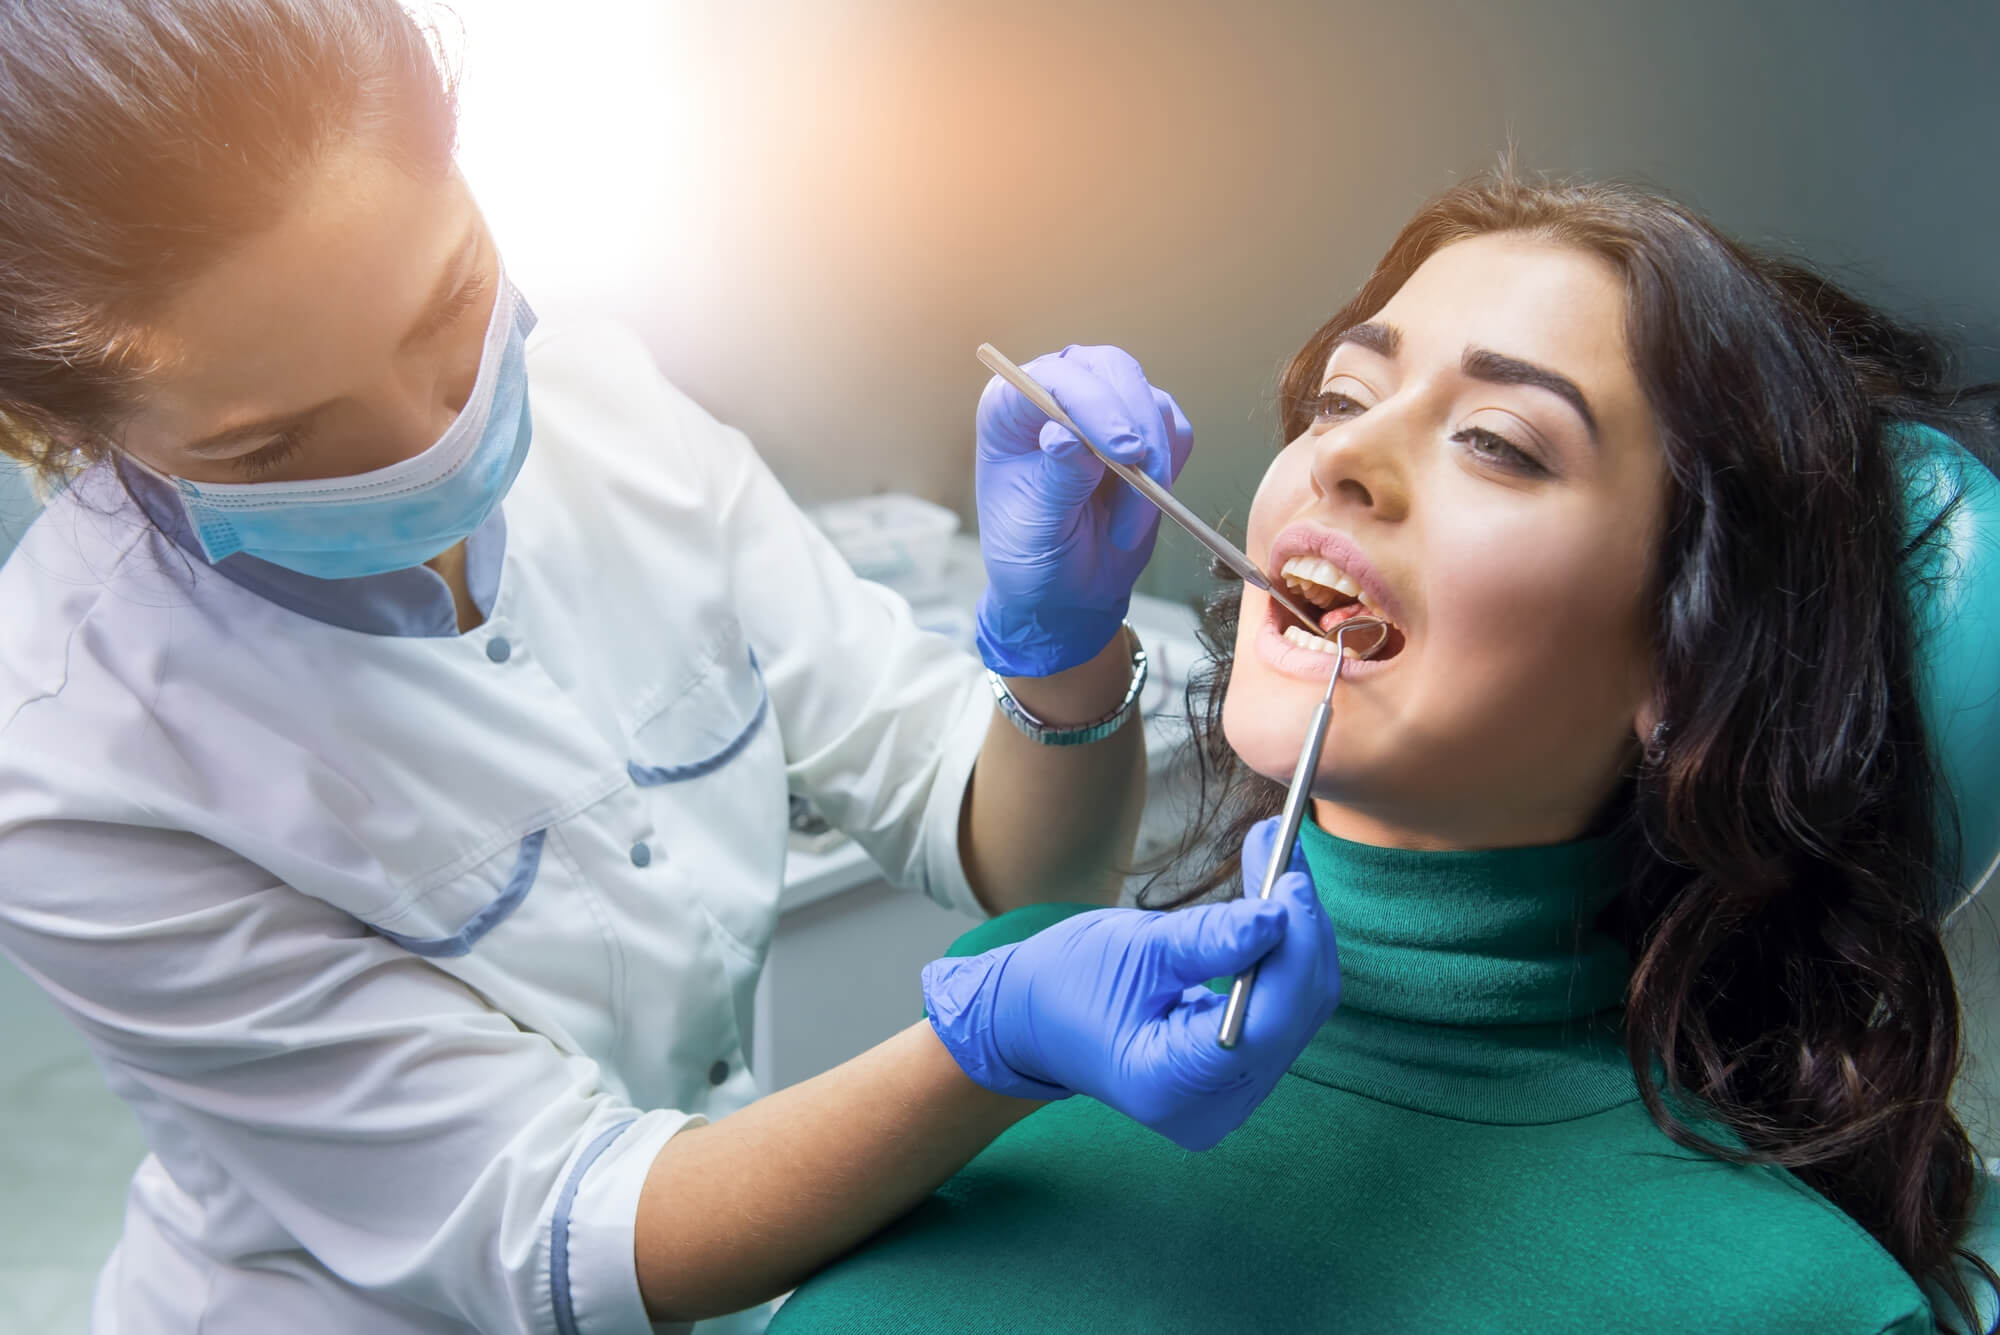 Transform Your Smile A Comprehensive Guide to Oral Surgery and Teeth Whitening in Newport Beach: